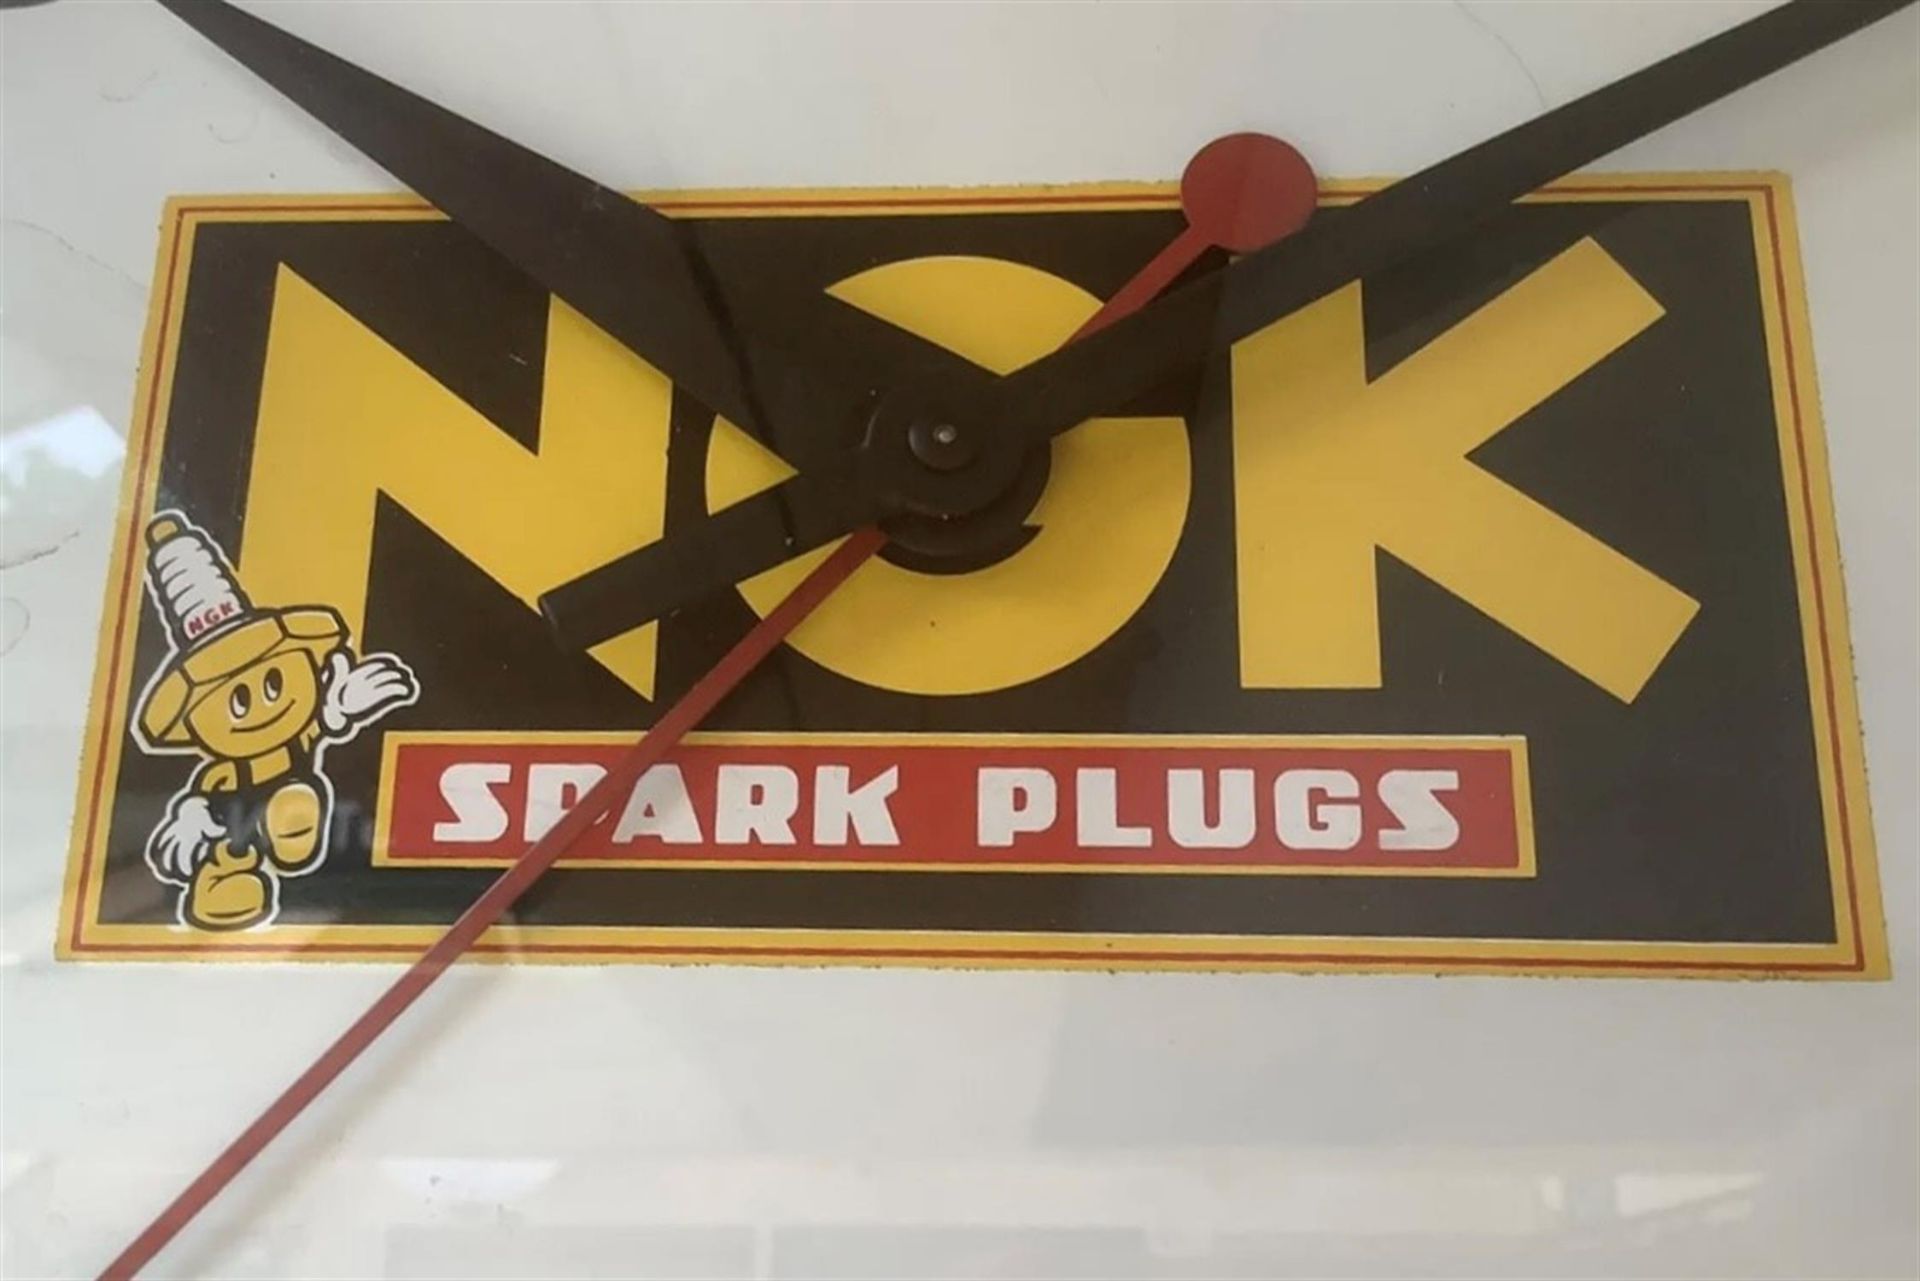 A Rare NGK Spark Plugs 14" Smiths Astral Dial Clock - Image 8 of 9